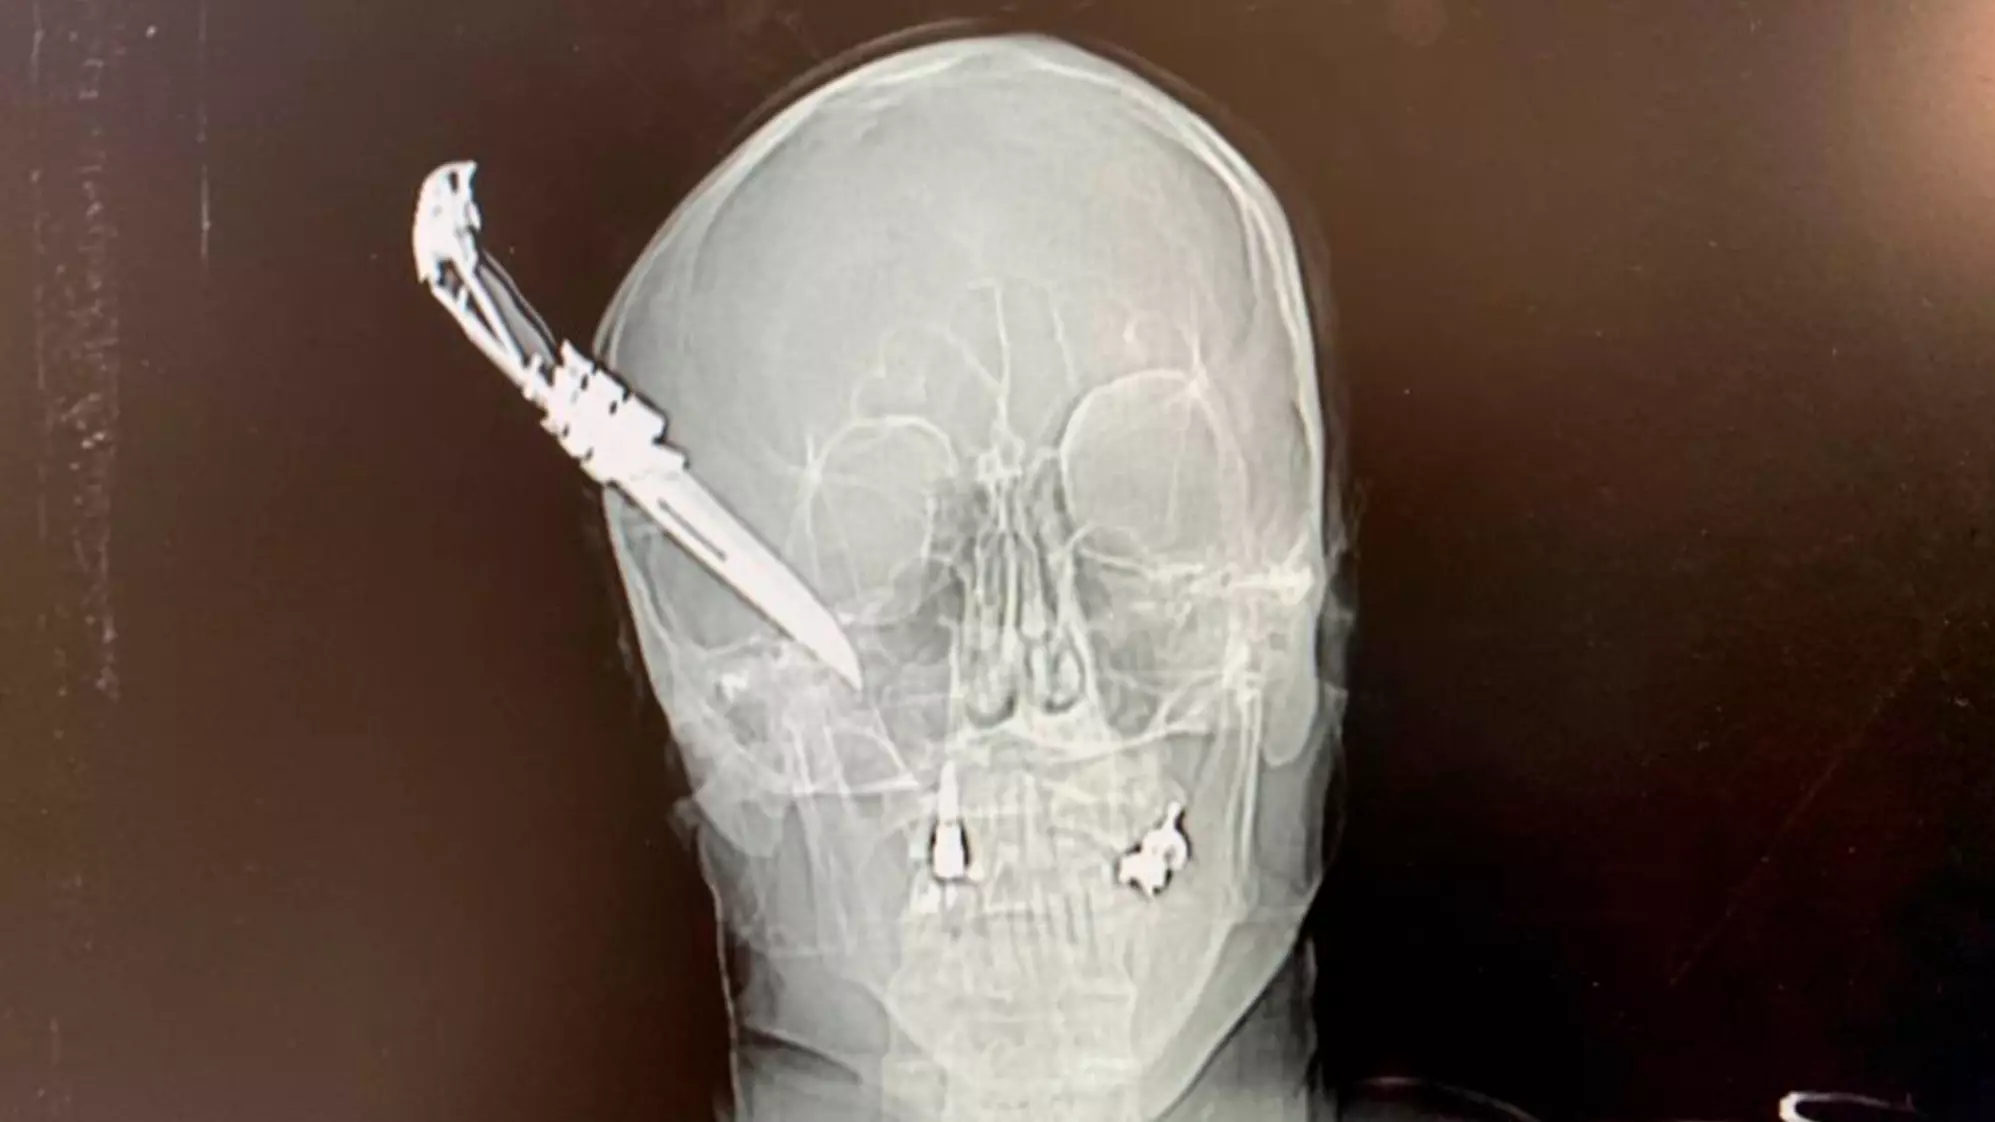 Gruesome X-Ray Shows Knife Sticking Out Of Man's Head After Attack